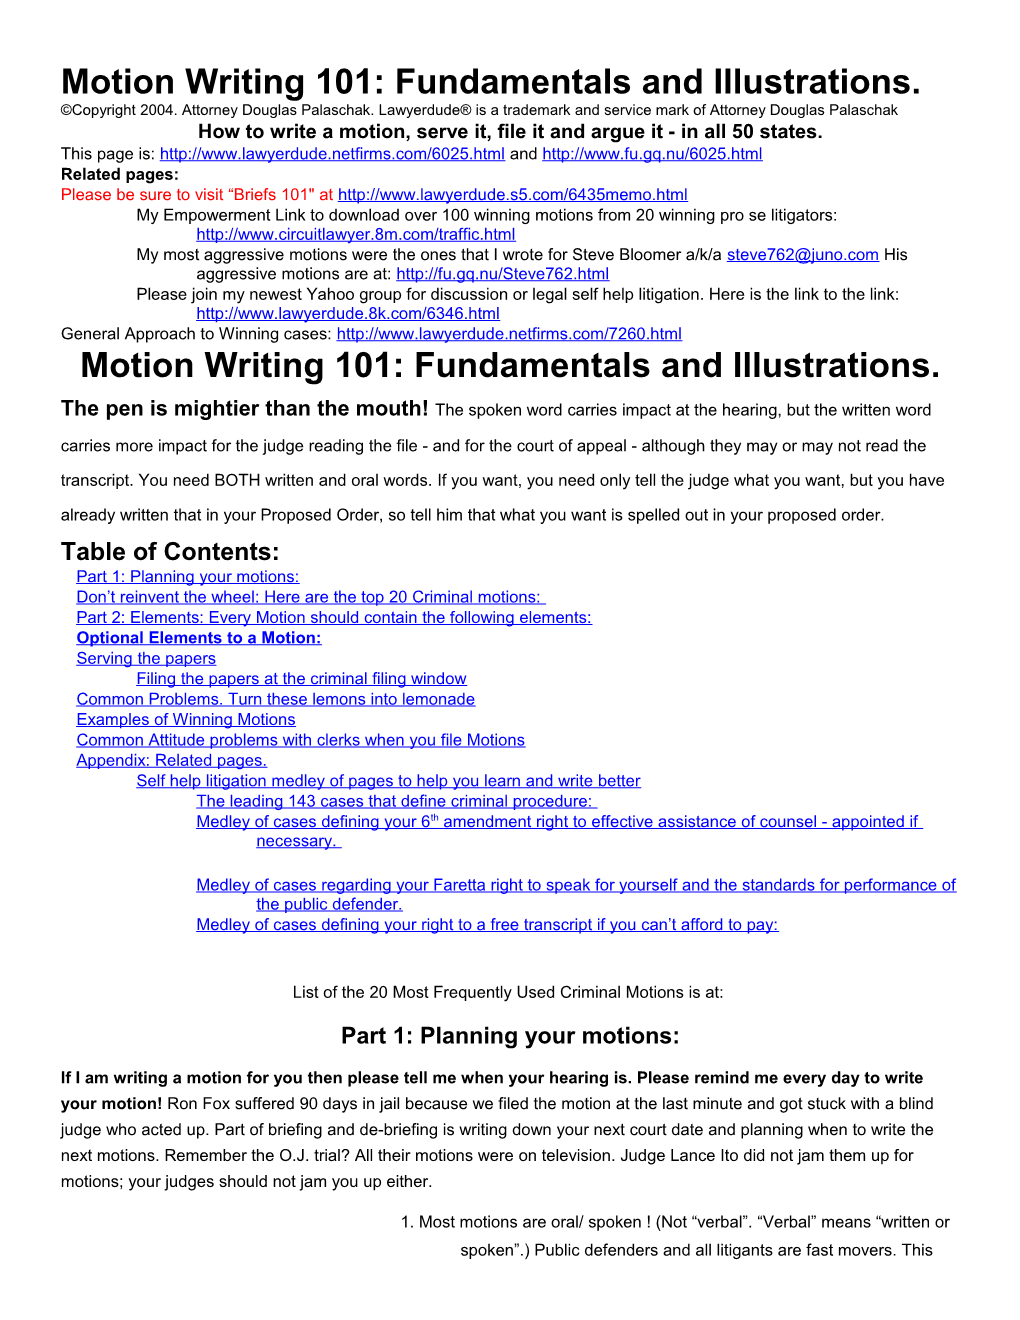 How to Write a Motion, Serve It, File It and Argue It - in All 50 States